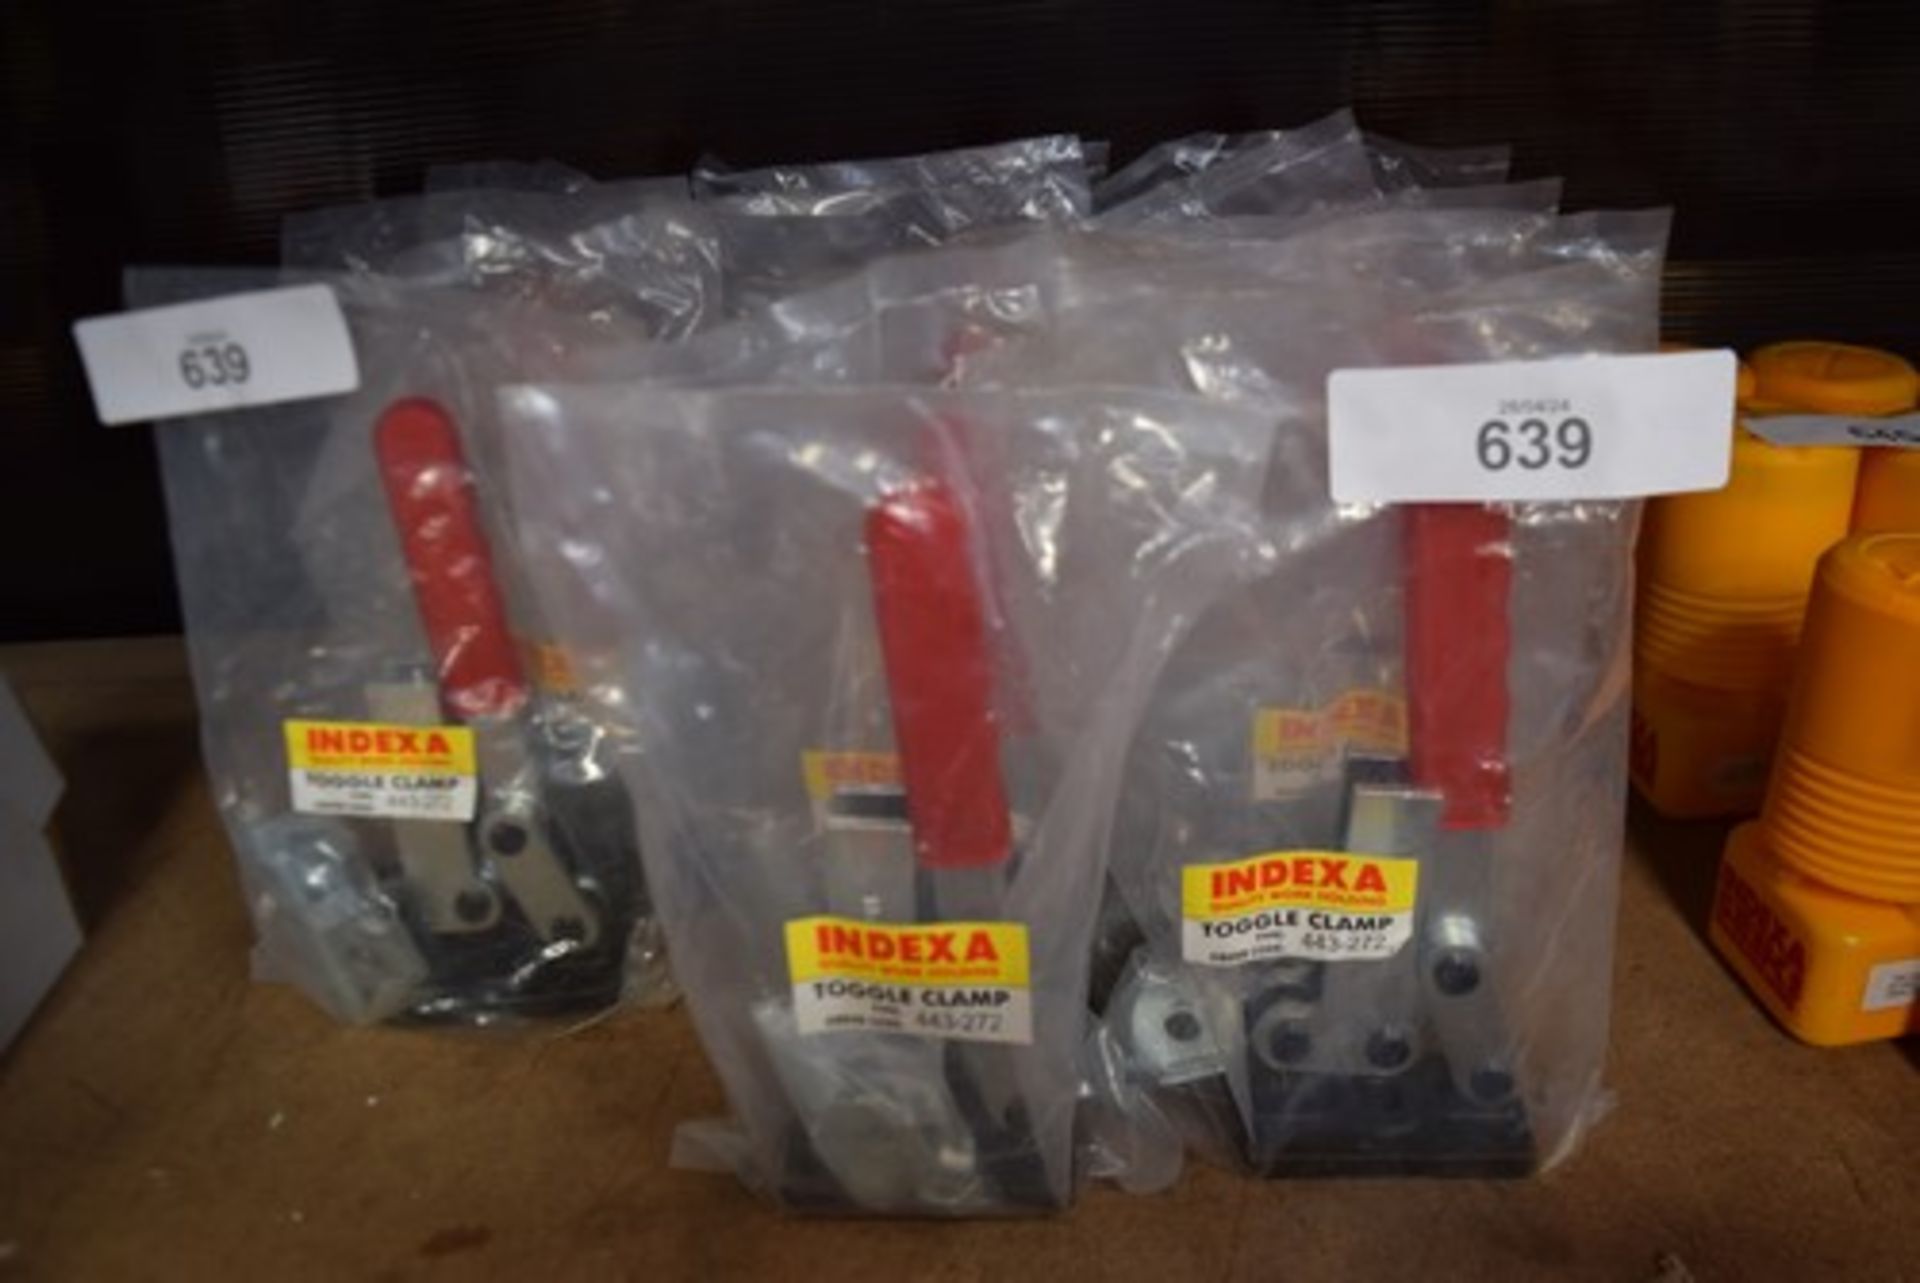 14 x Indexa toggle clamps, part No: 443-272 - new (GS6)